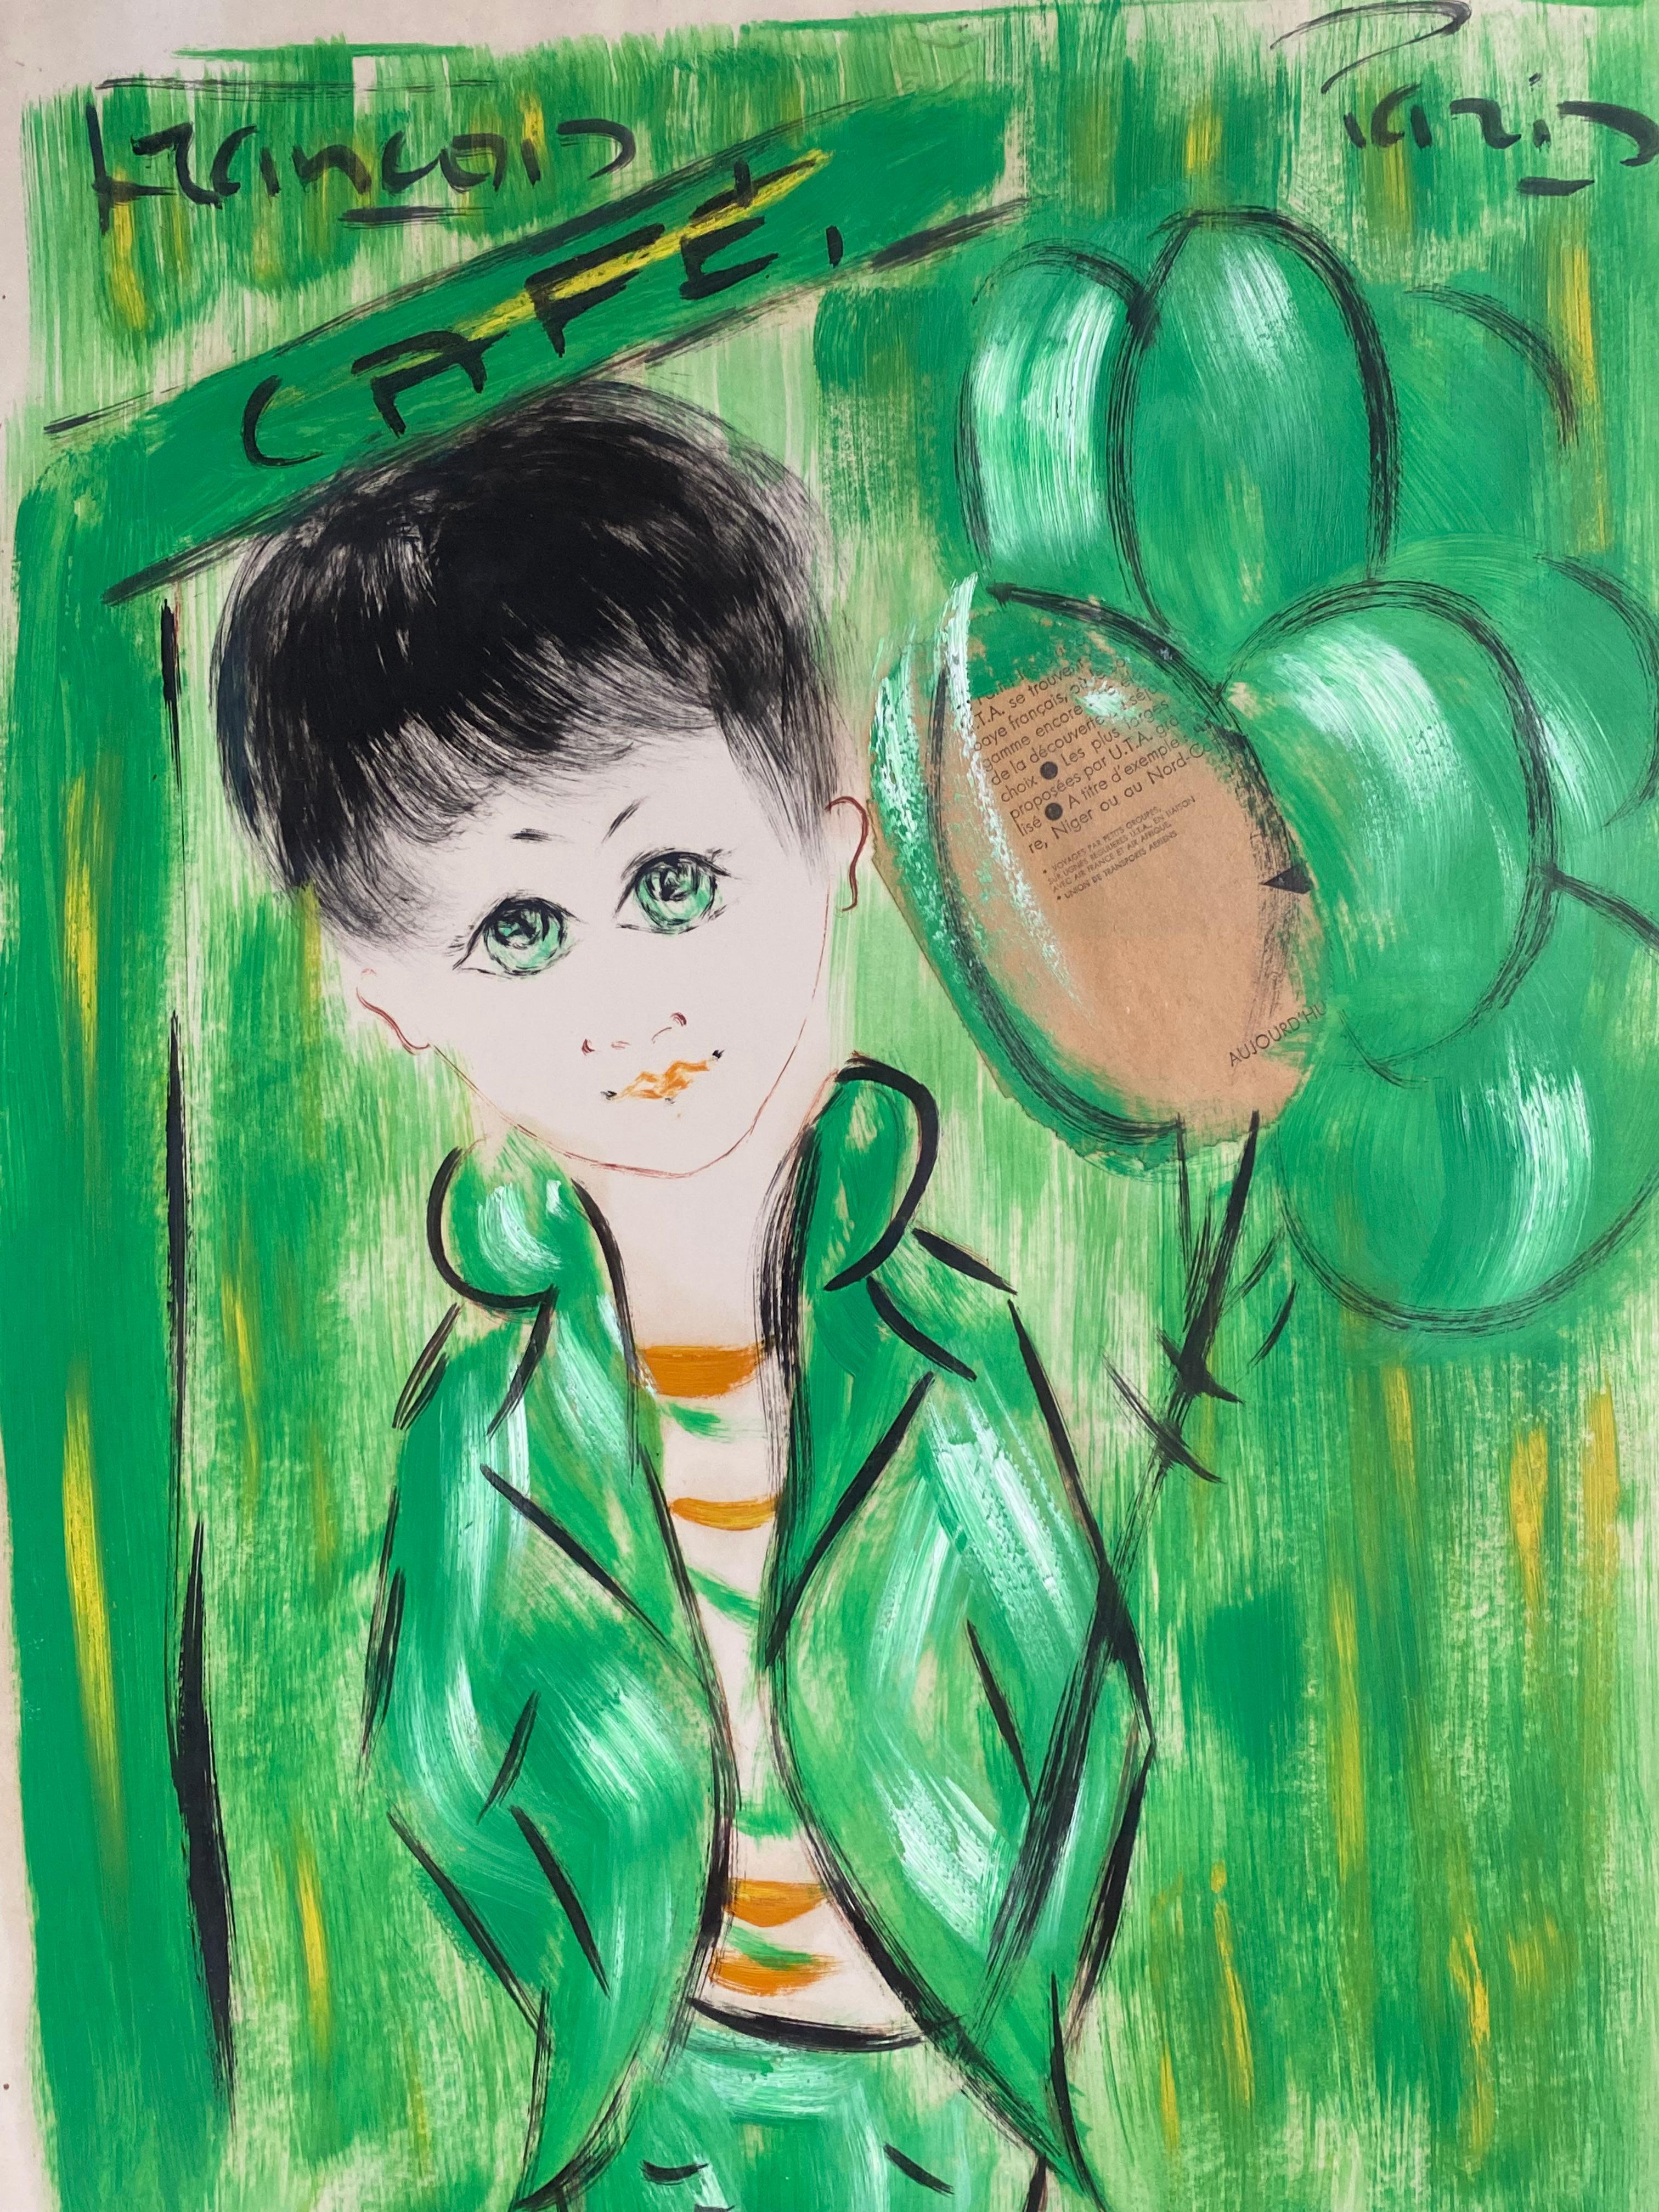 Original acrylic on heavy archival paper by the well known French artist, Andre Francois.  Signed  top left “Francois”. Condition is excellent. Circa 1965.  Young, wide eyed girl holding balloons with a cafe sign in the background. Vibrant green